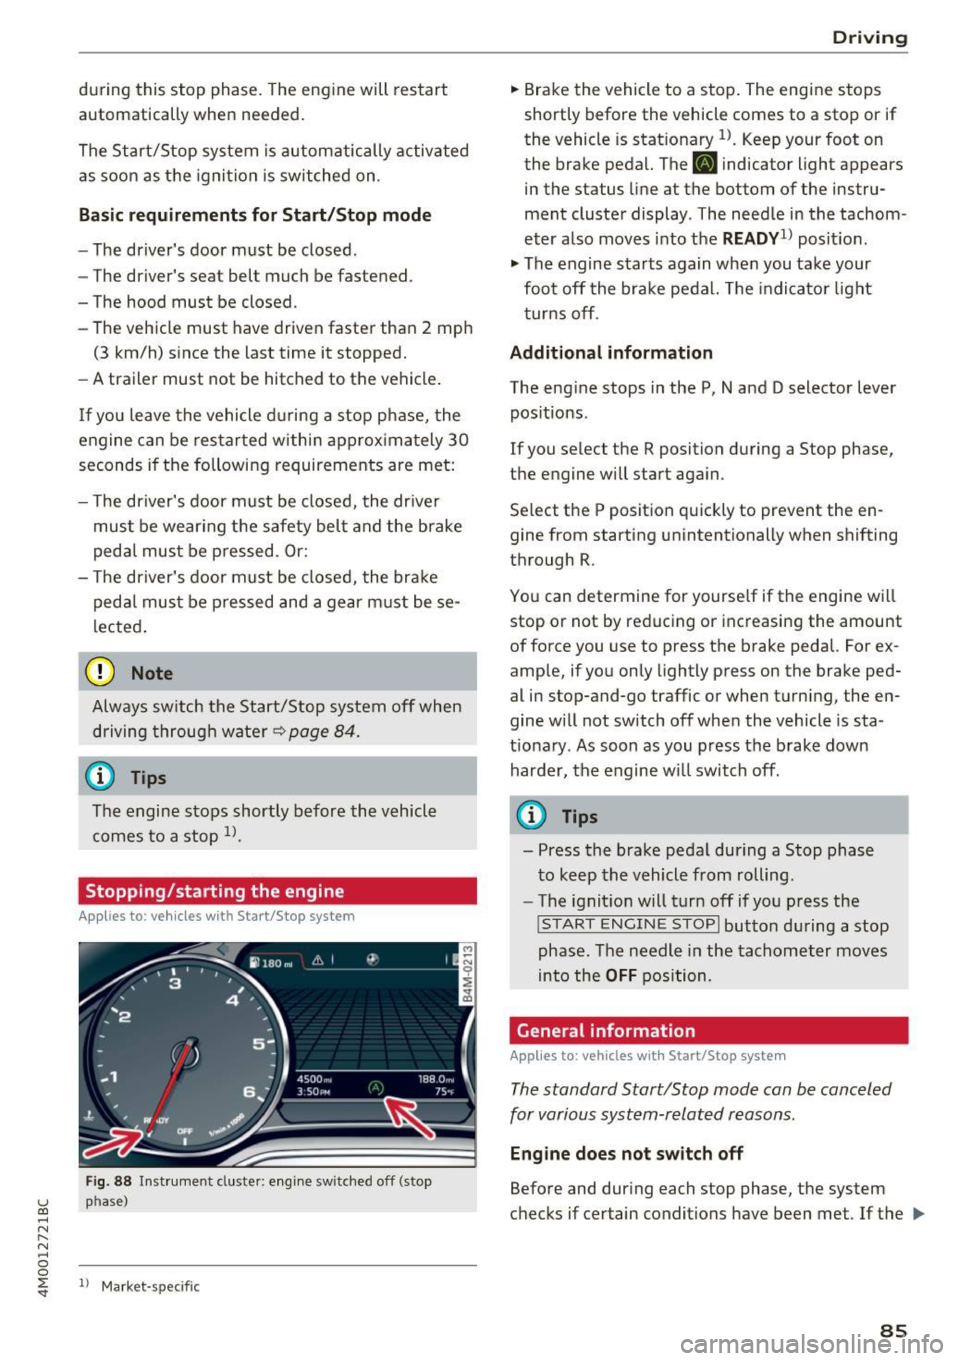 AUDI Q7 2017  Owner´s Manual u (0 ...... N r--. N ...... 0 
0 
:E <t 
during  this  stop  phase. The  eng ine  will  restart 
automatically  when  needed. 
The Start/Stop  system  is automatically  activ ated 
as  soon  as  the  